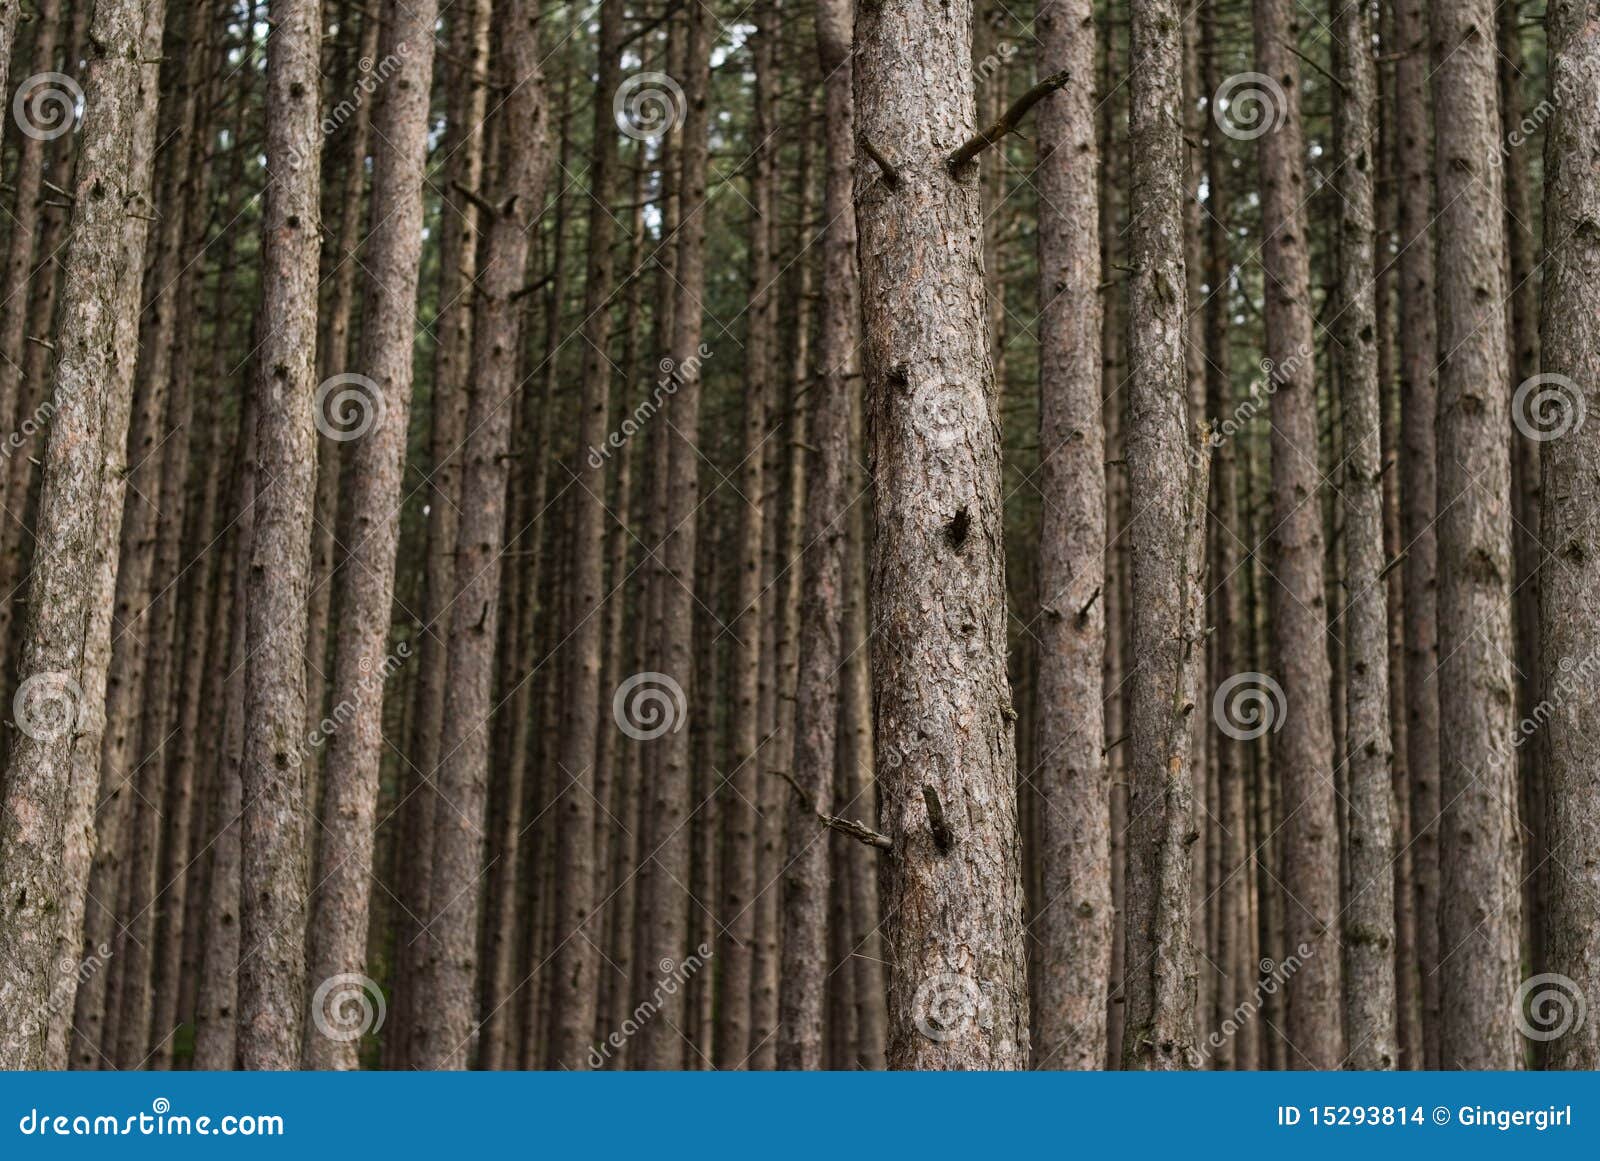 Forest background. Forest abstract background with many trees